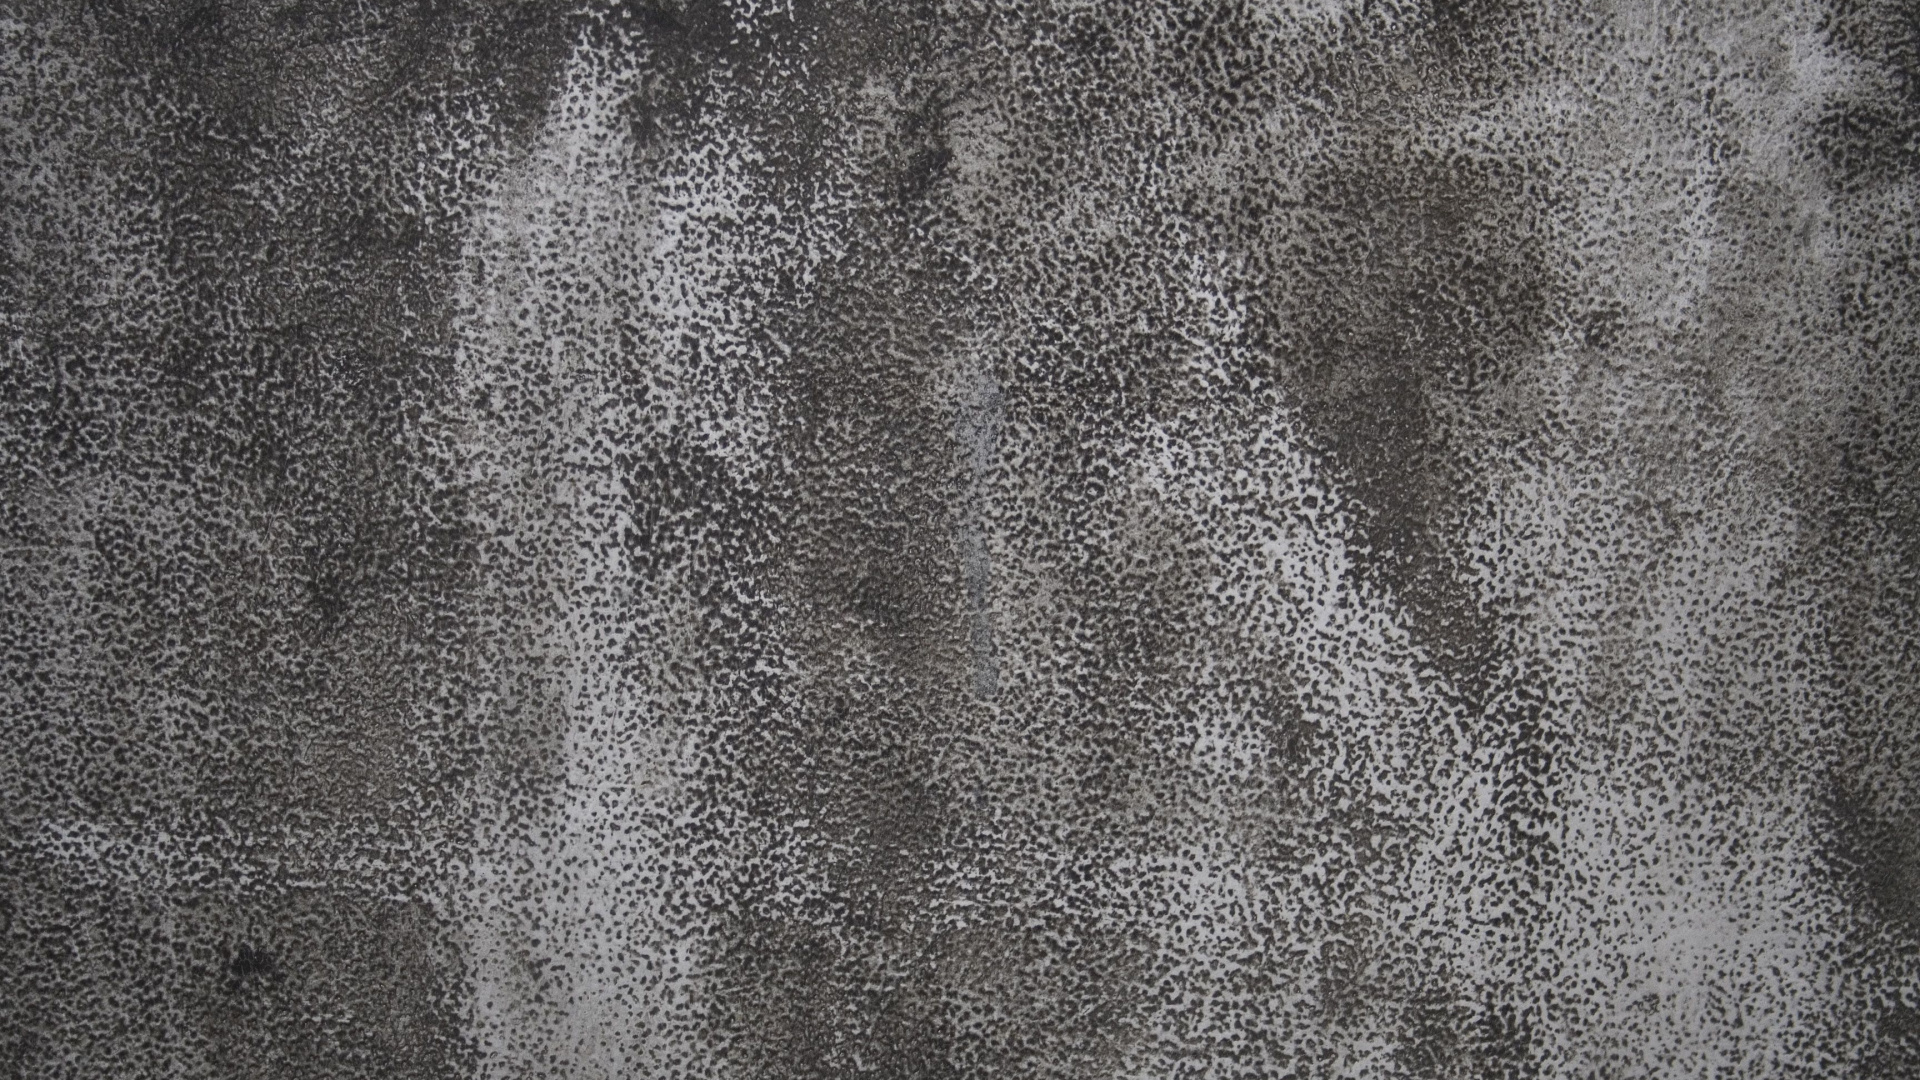 Black Textile With White Stain. Wallpaper in 1920x1080 Resolution